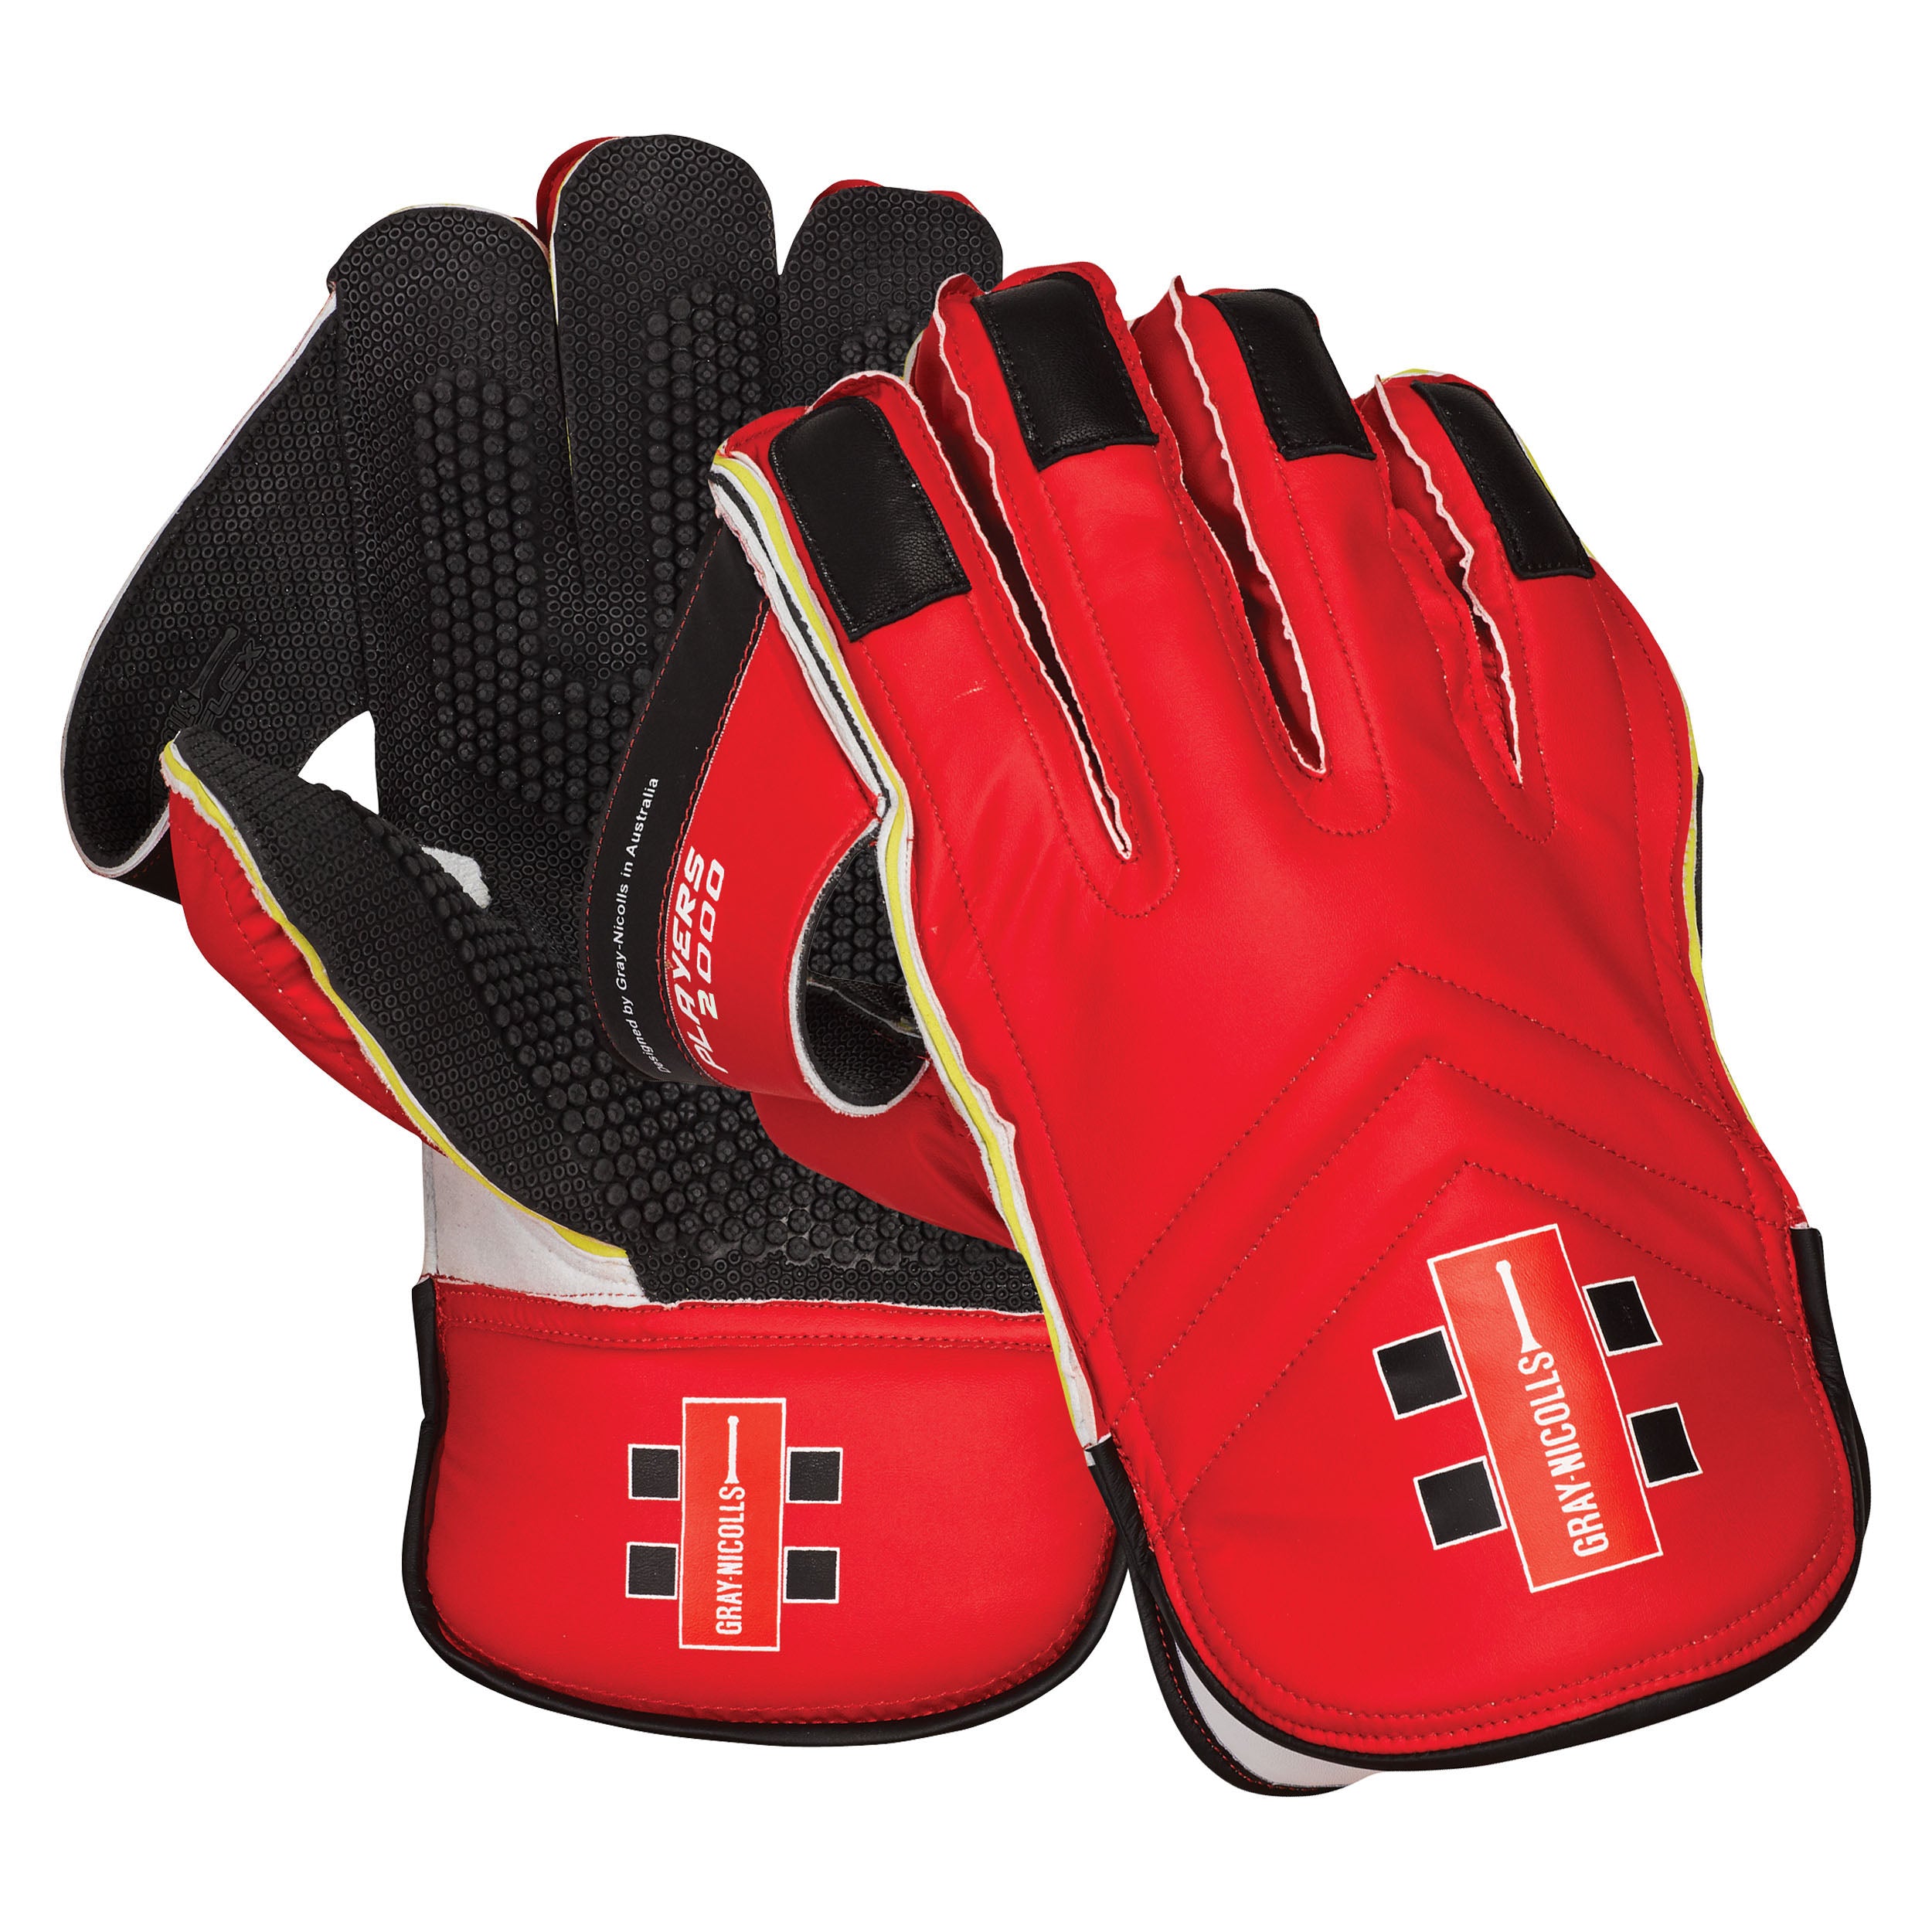 Gray Nicolls Players 2000 Cricket Wicket Keeping Gloves